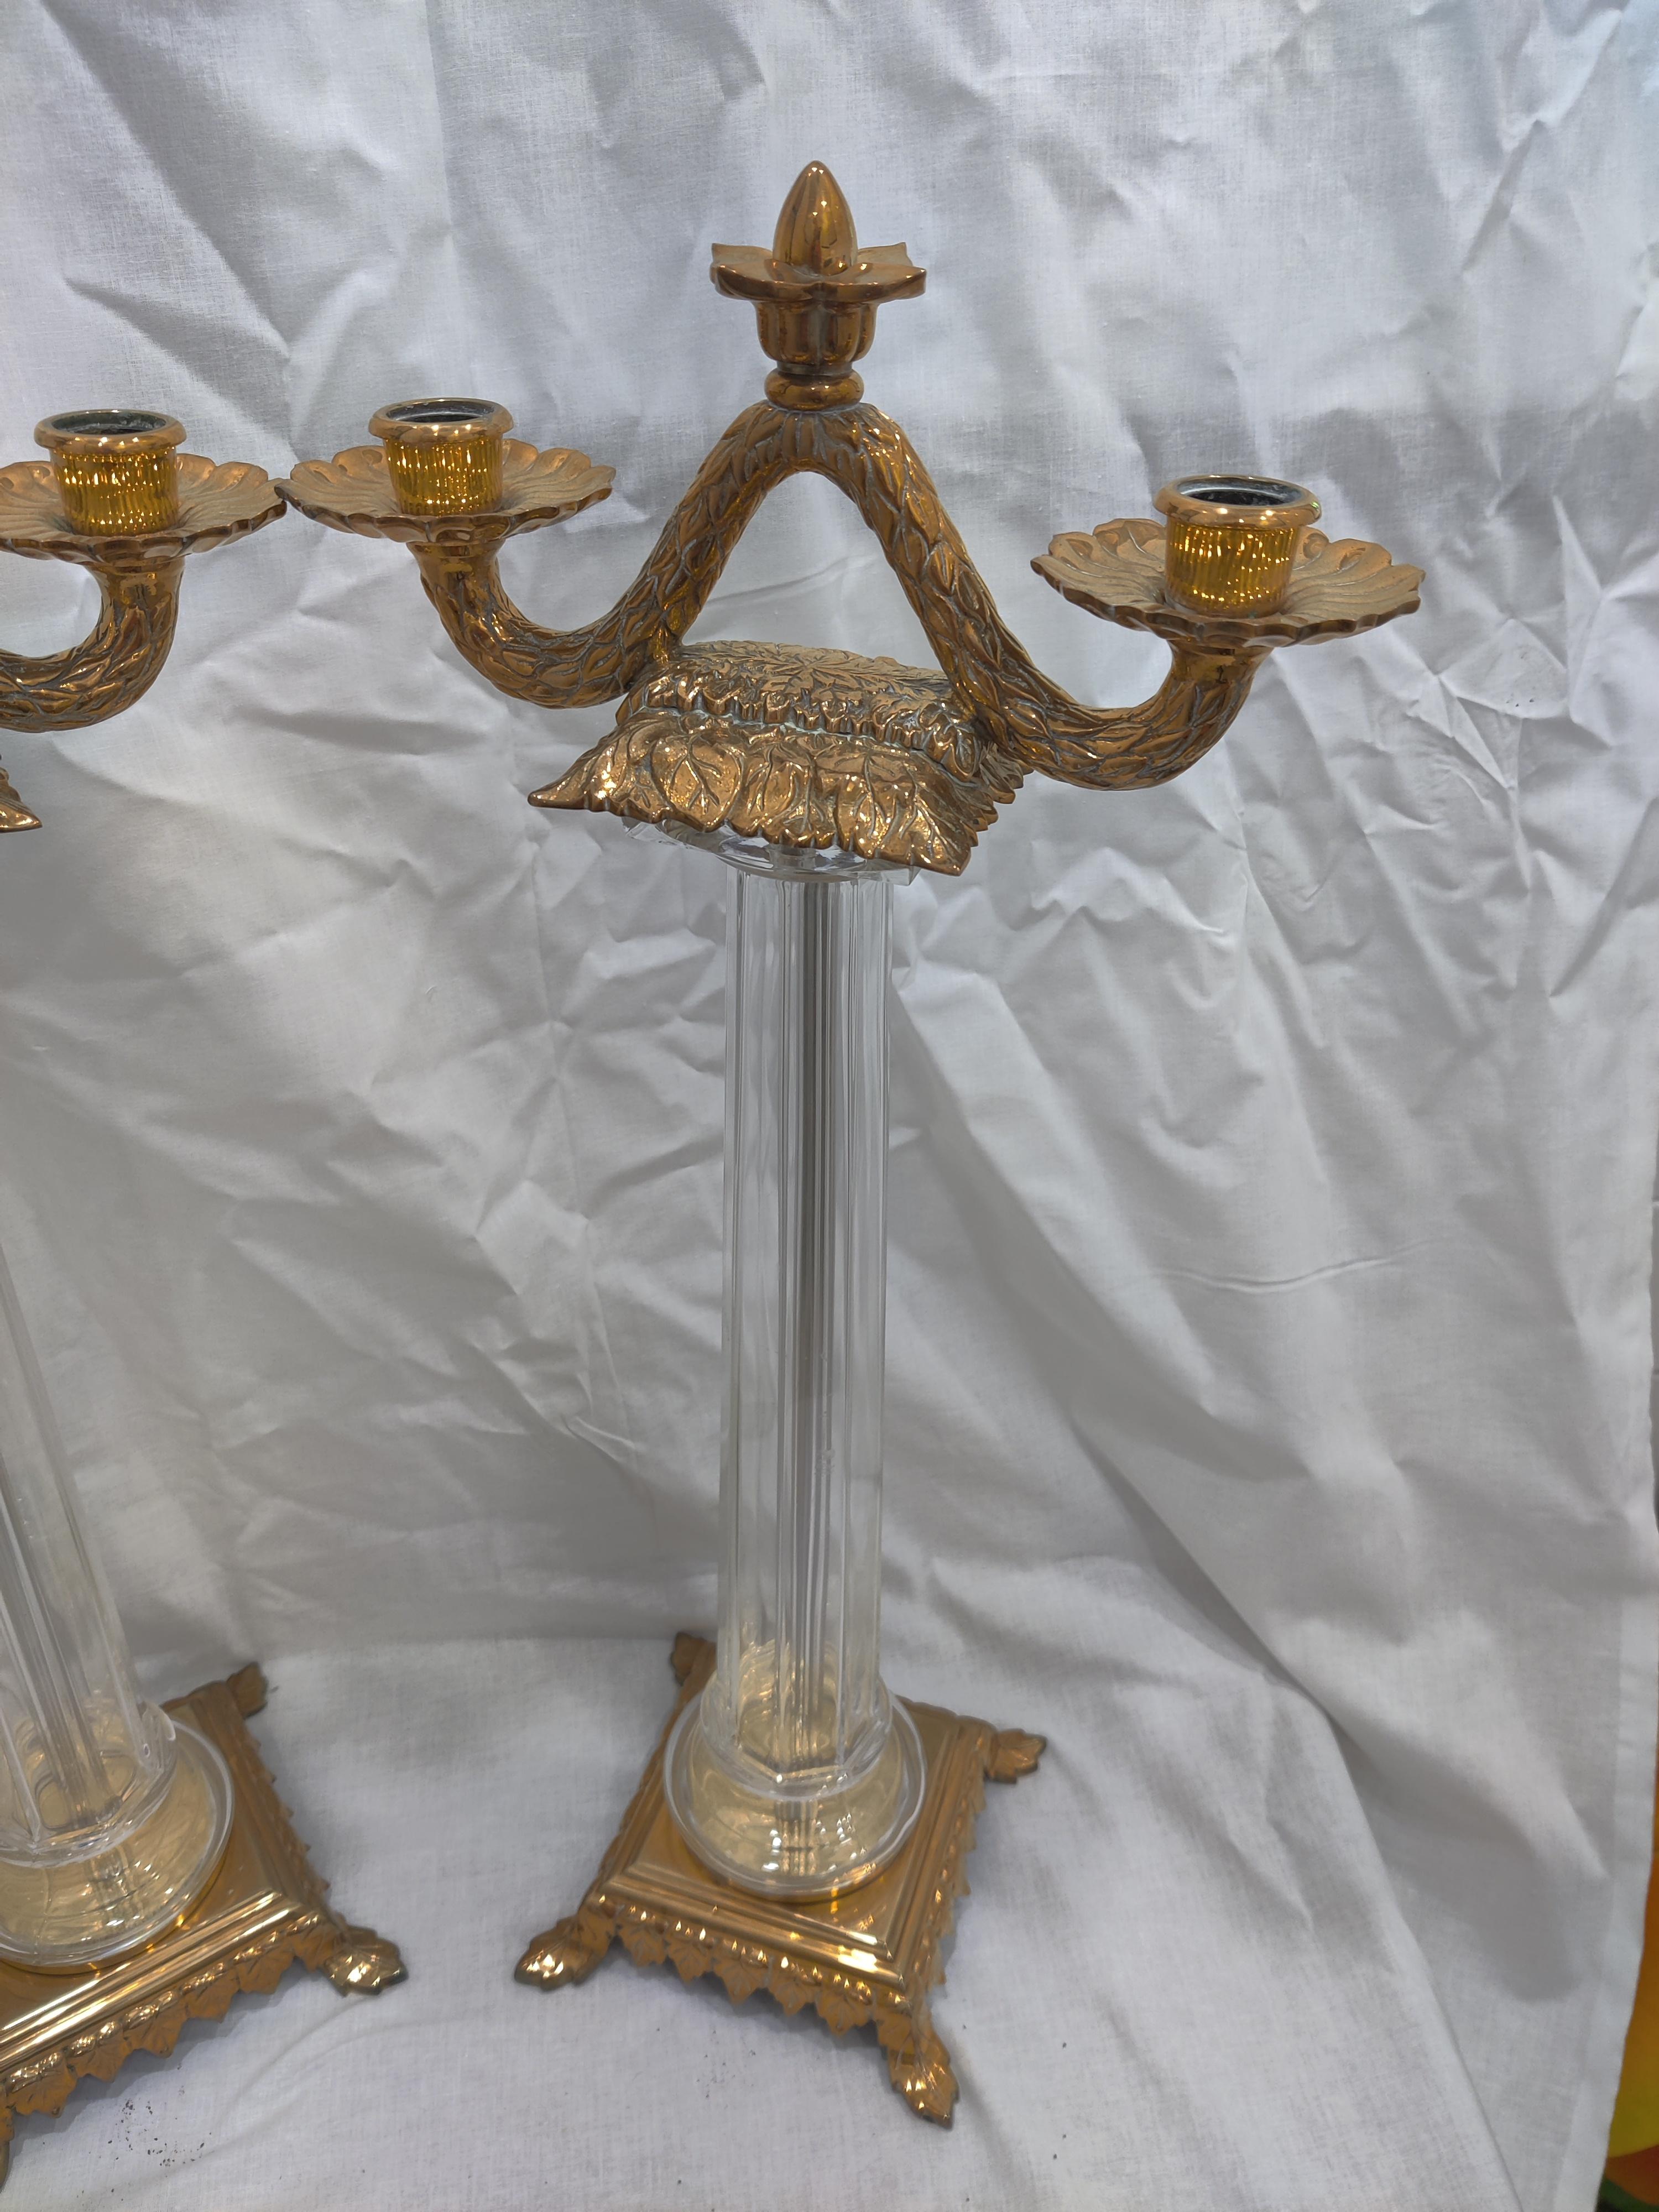 Pair of Chapman Solid Brass and Glass Candelabras
Very good condition